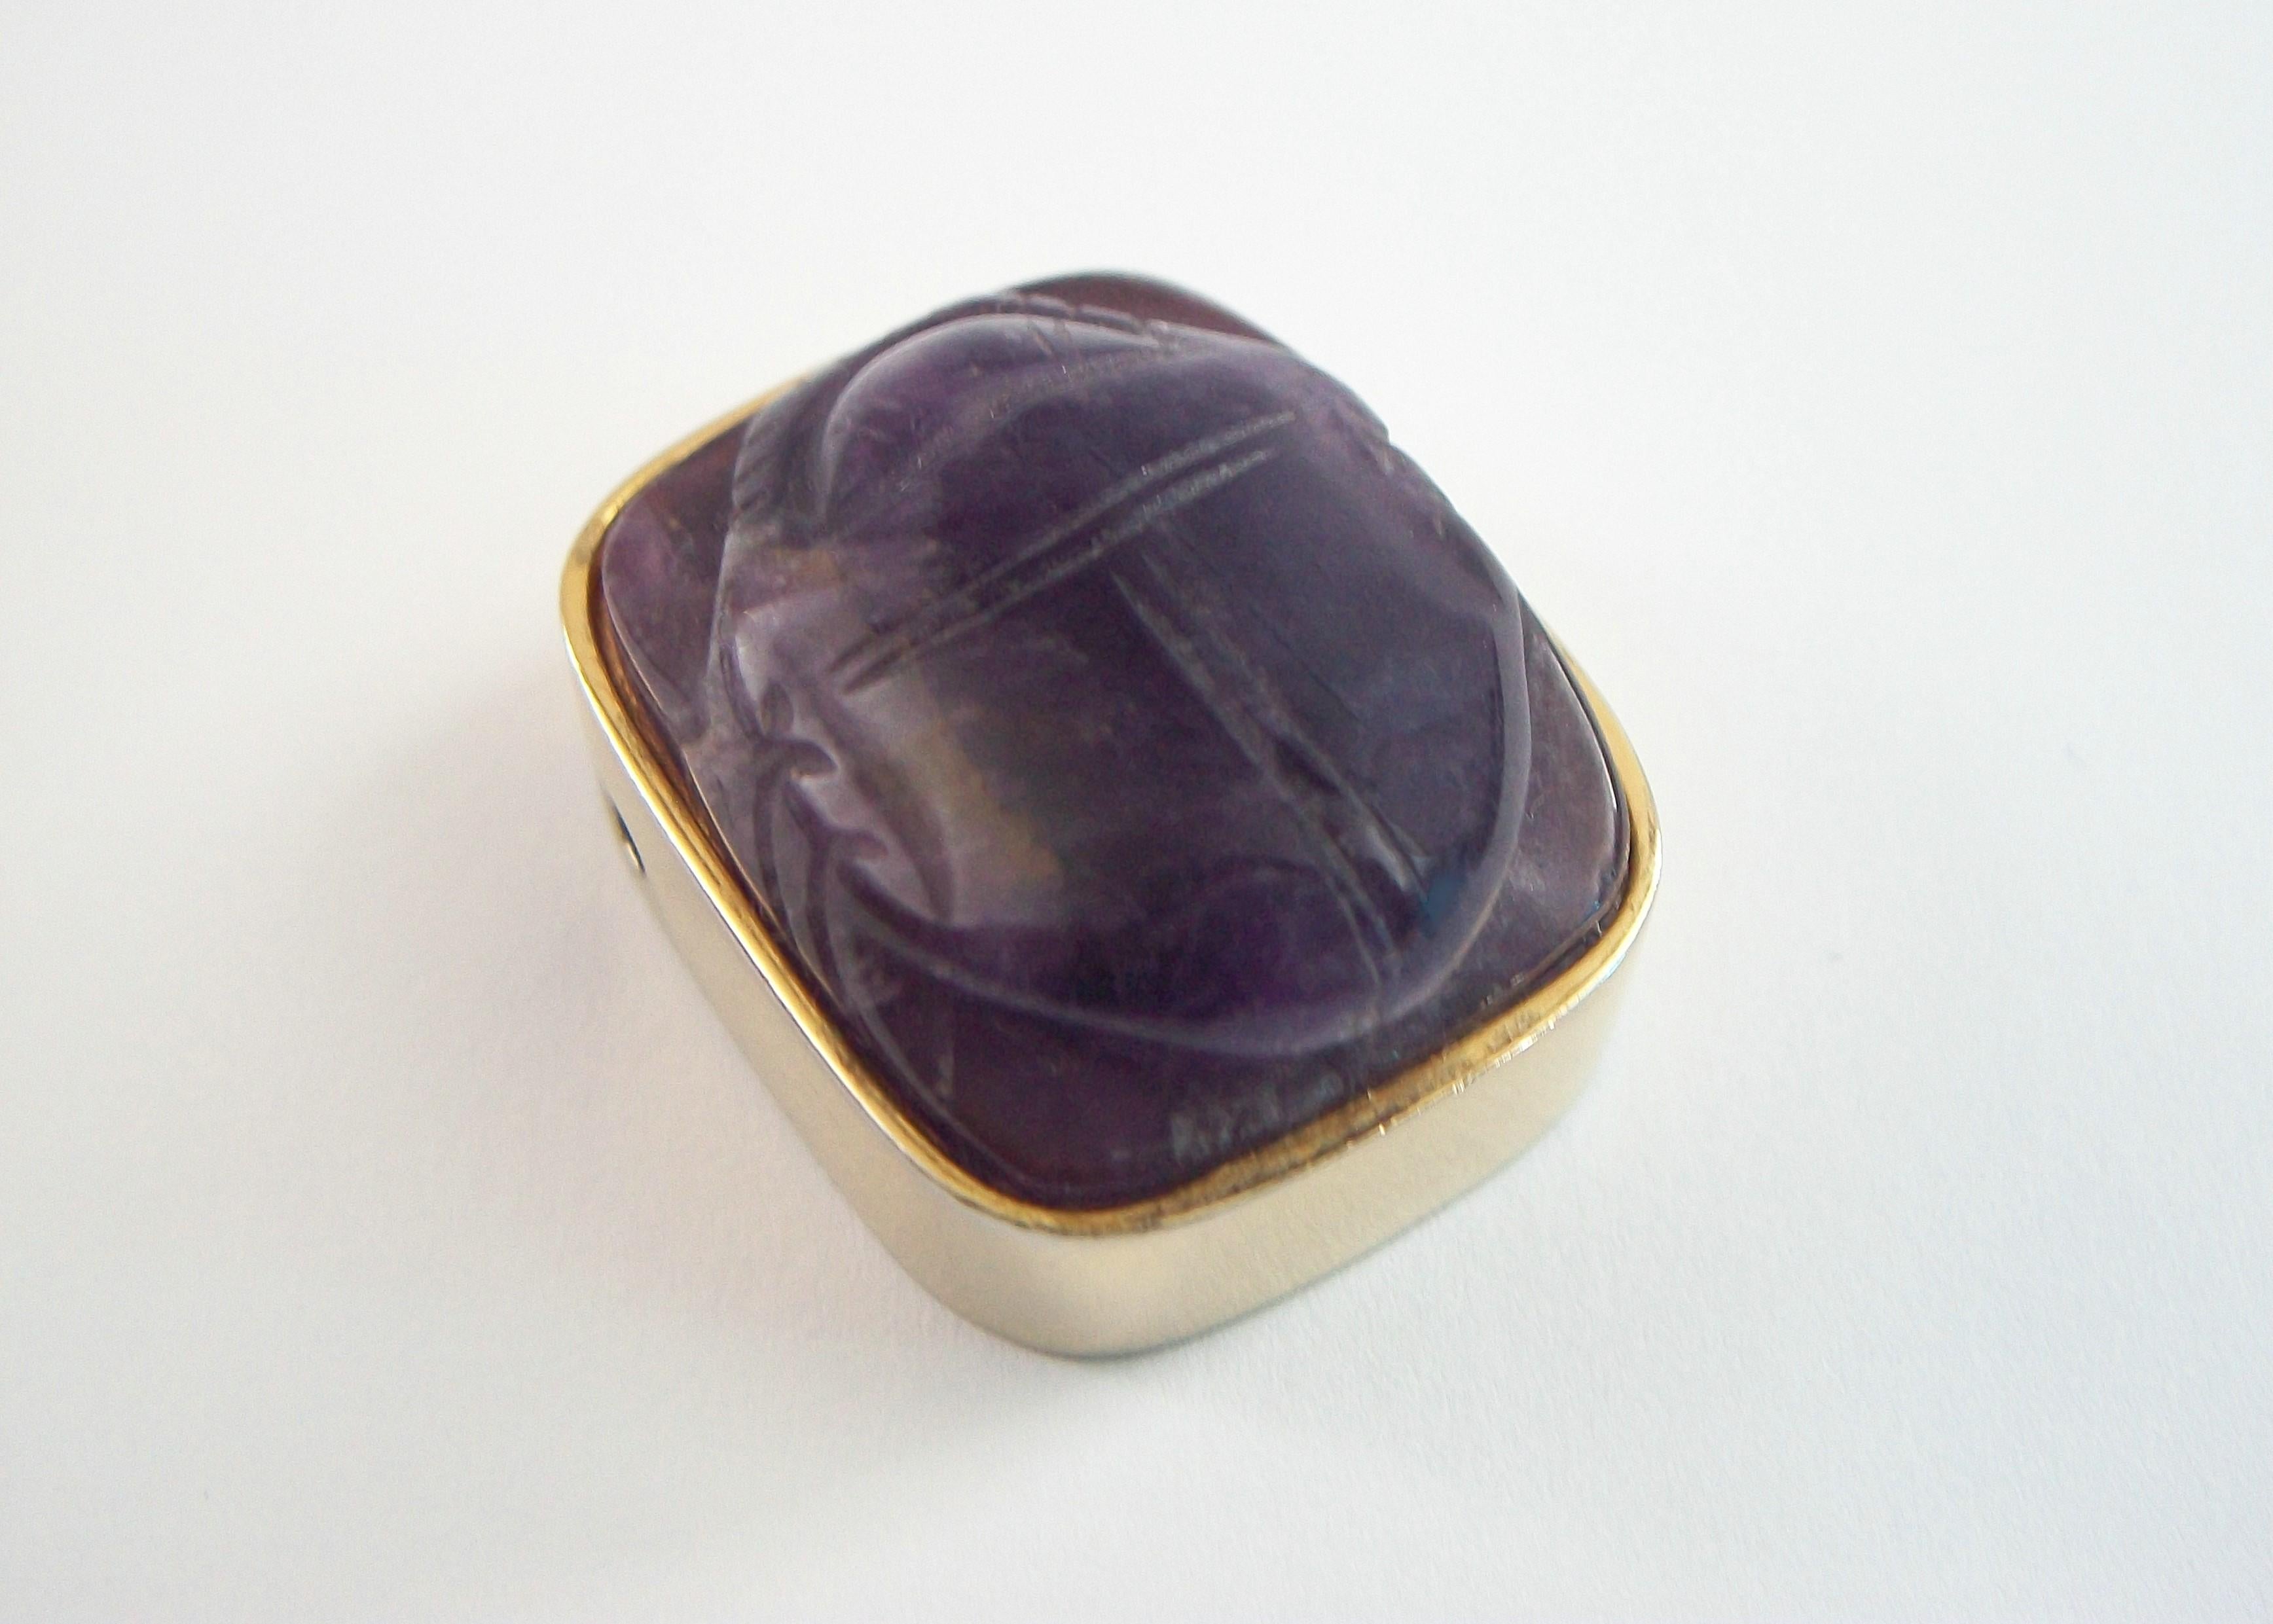 METROPOLITAN MUSEUM OF ART - Egyptian revival carved amethyst scarab beetle pendant - the scarab gemstone (approx. 42.34 total carat weight - 27 mm. long x 22 mm. wide x 10 mm. deep) bezel set in vermeil (sterling silver with a gold wash) with holes